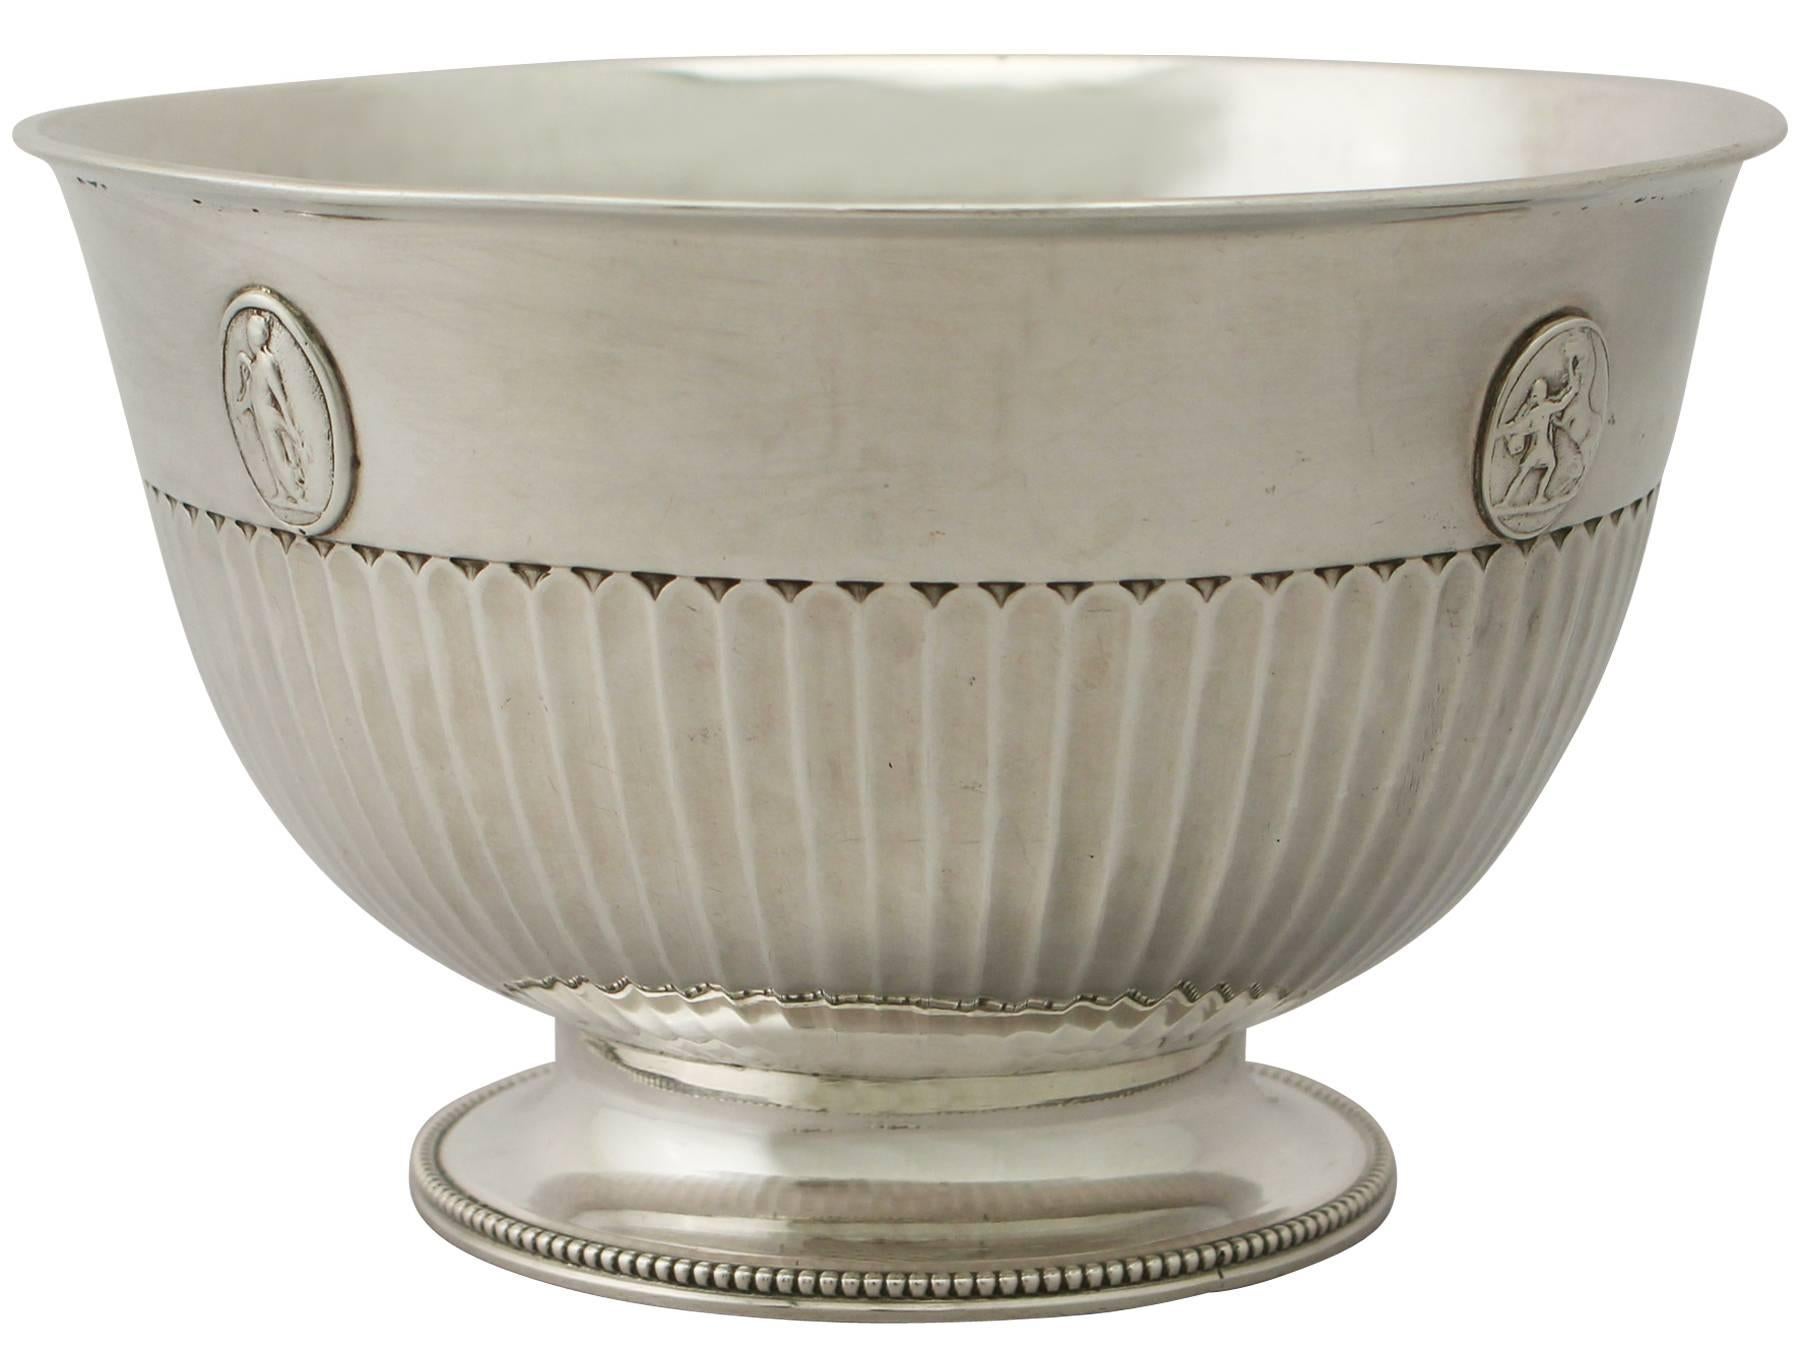 An exceptional, fine and impressive antique George III English sterling silver bowl made by Benjamin Smith III; an addition to our Georgian silverware collection.

This exceptional antique George III sterling silver bowl has a circular rounded